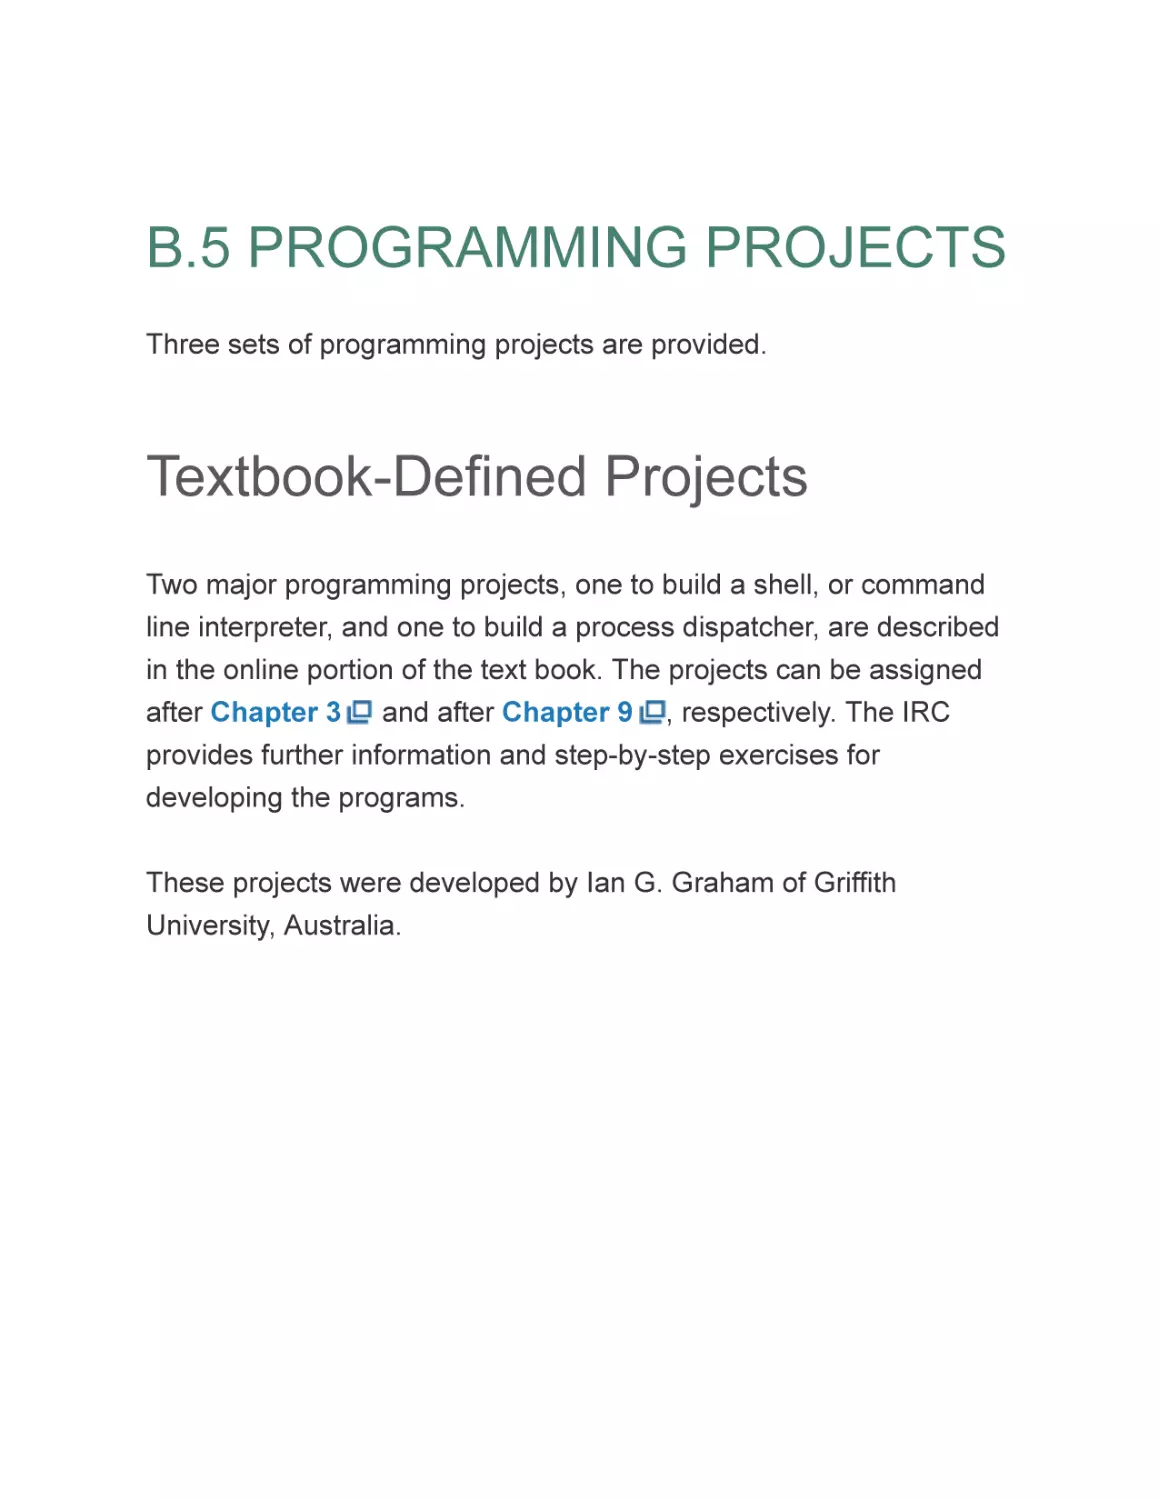 B.5 PROGRAMMING PROJECTS
Textbook-Defined Projects